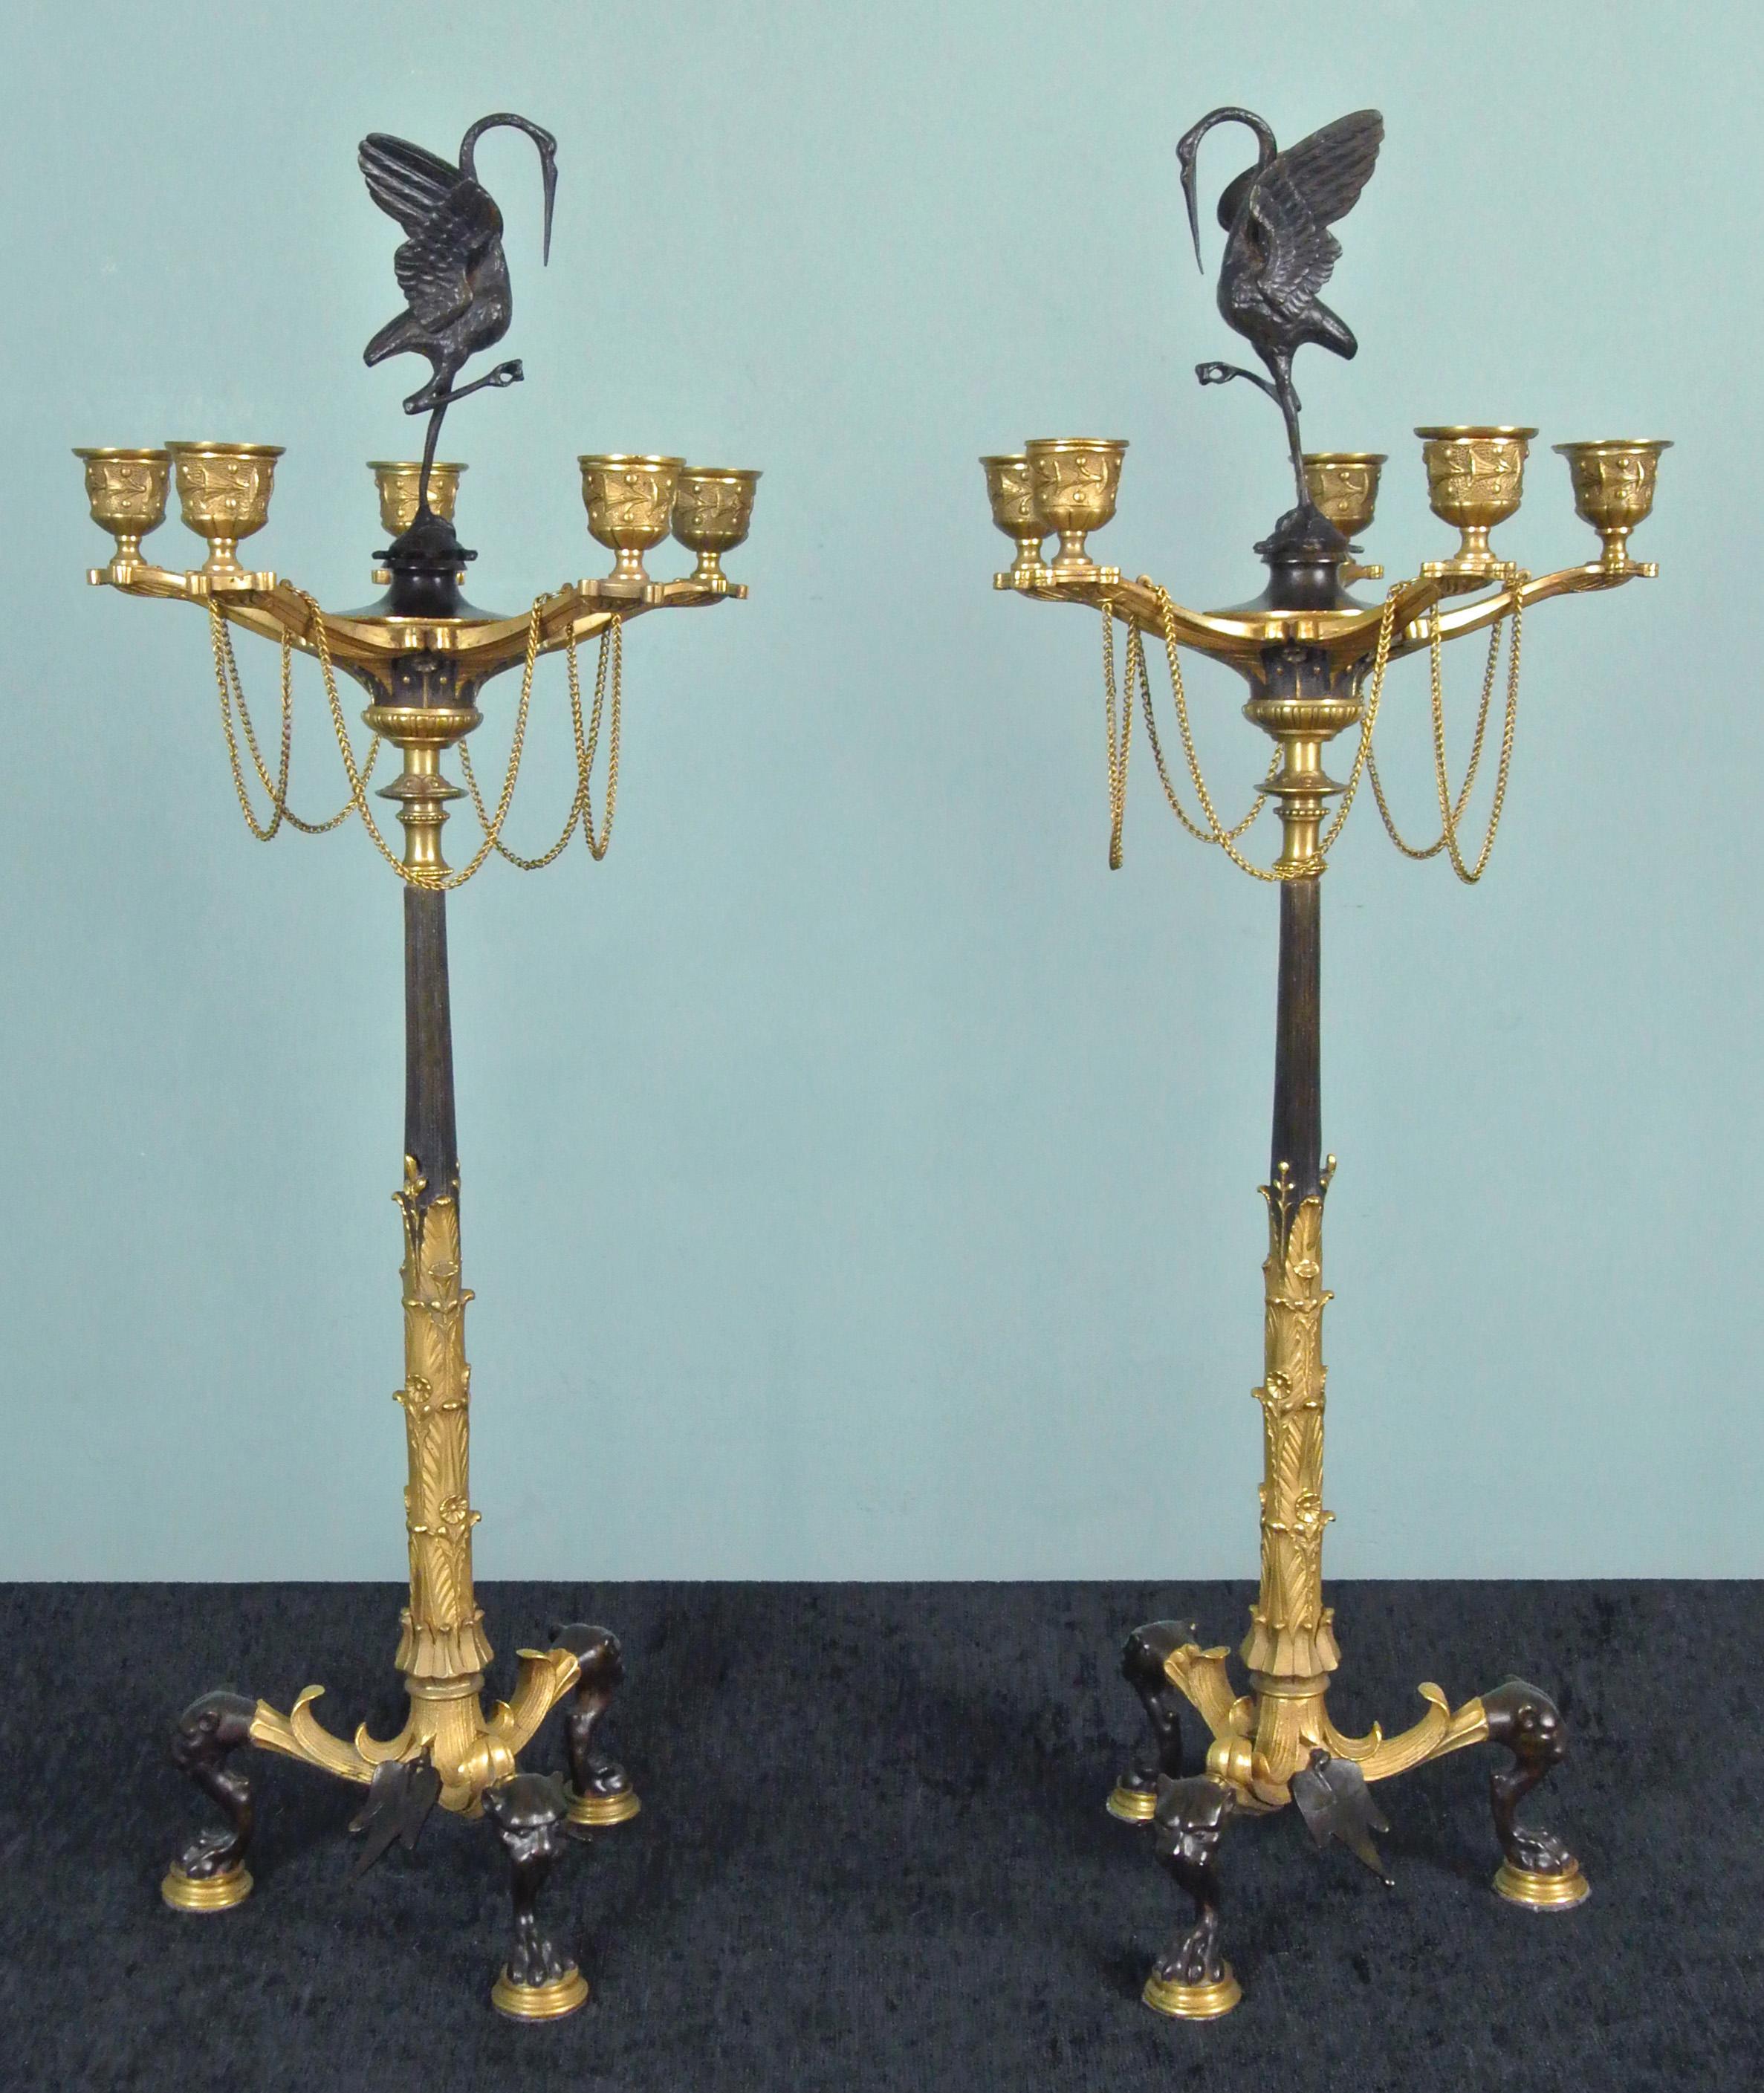 Exemplary Pair Barbedienne Bronze and Ormolu Candelabra c. 1880 For Sale 1